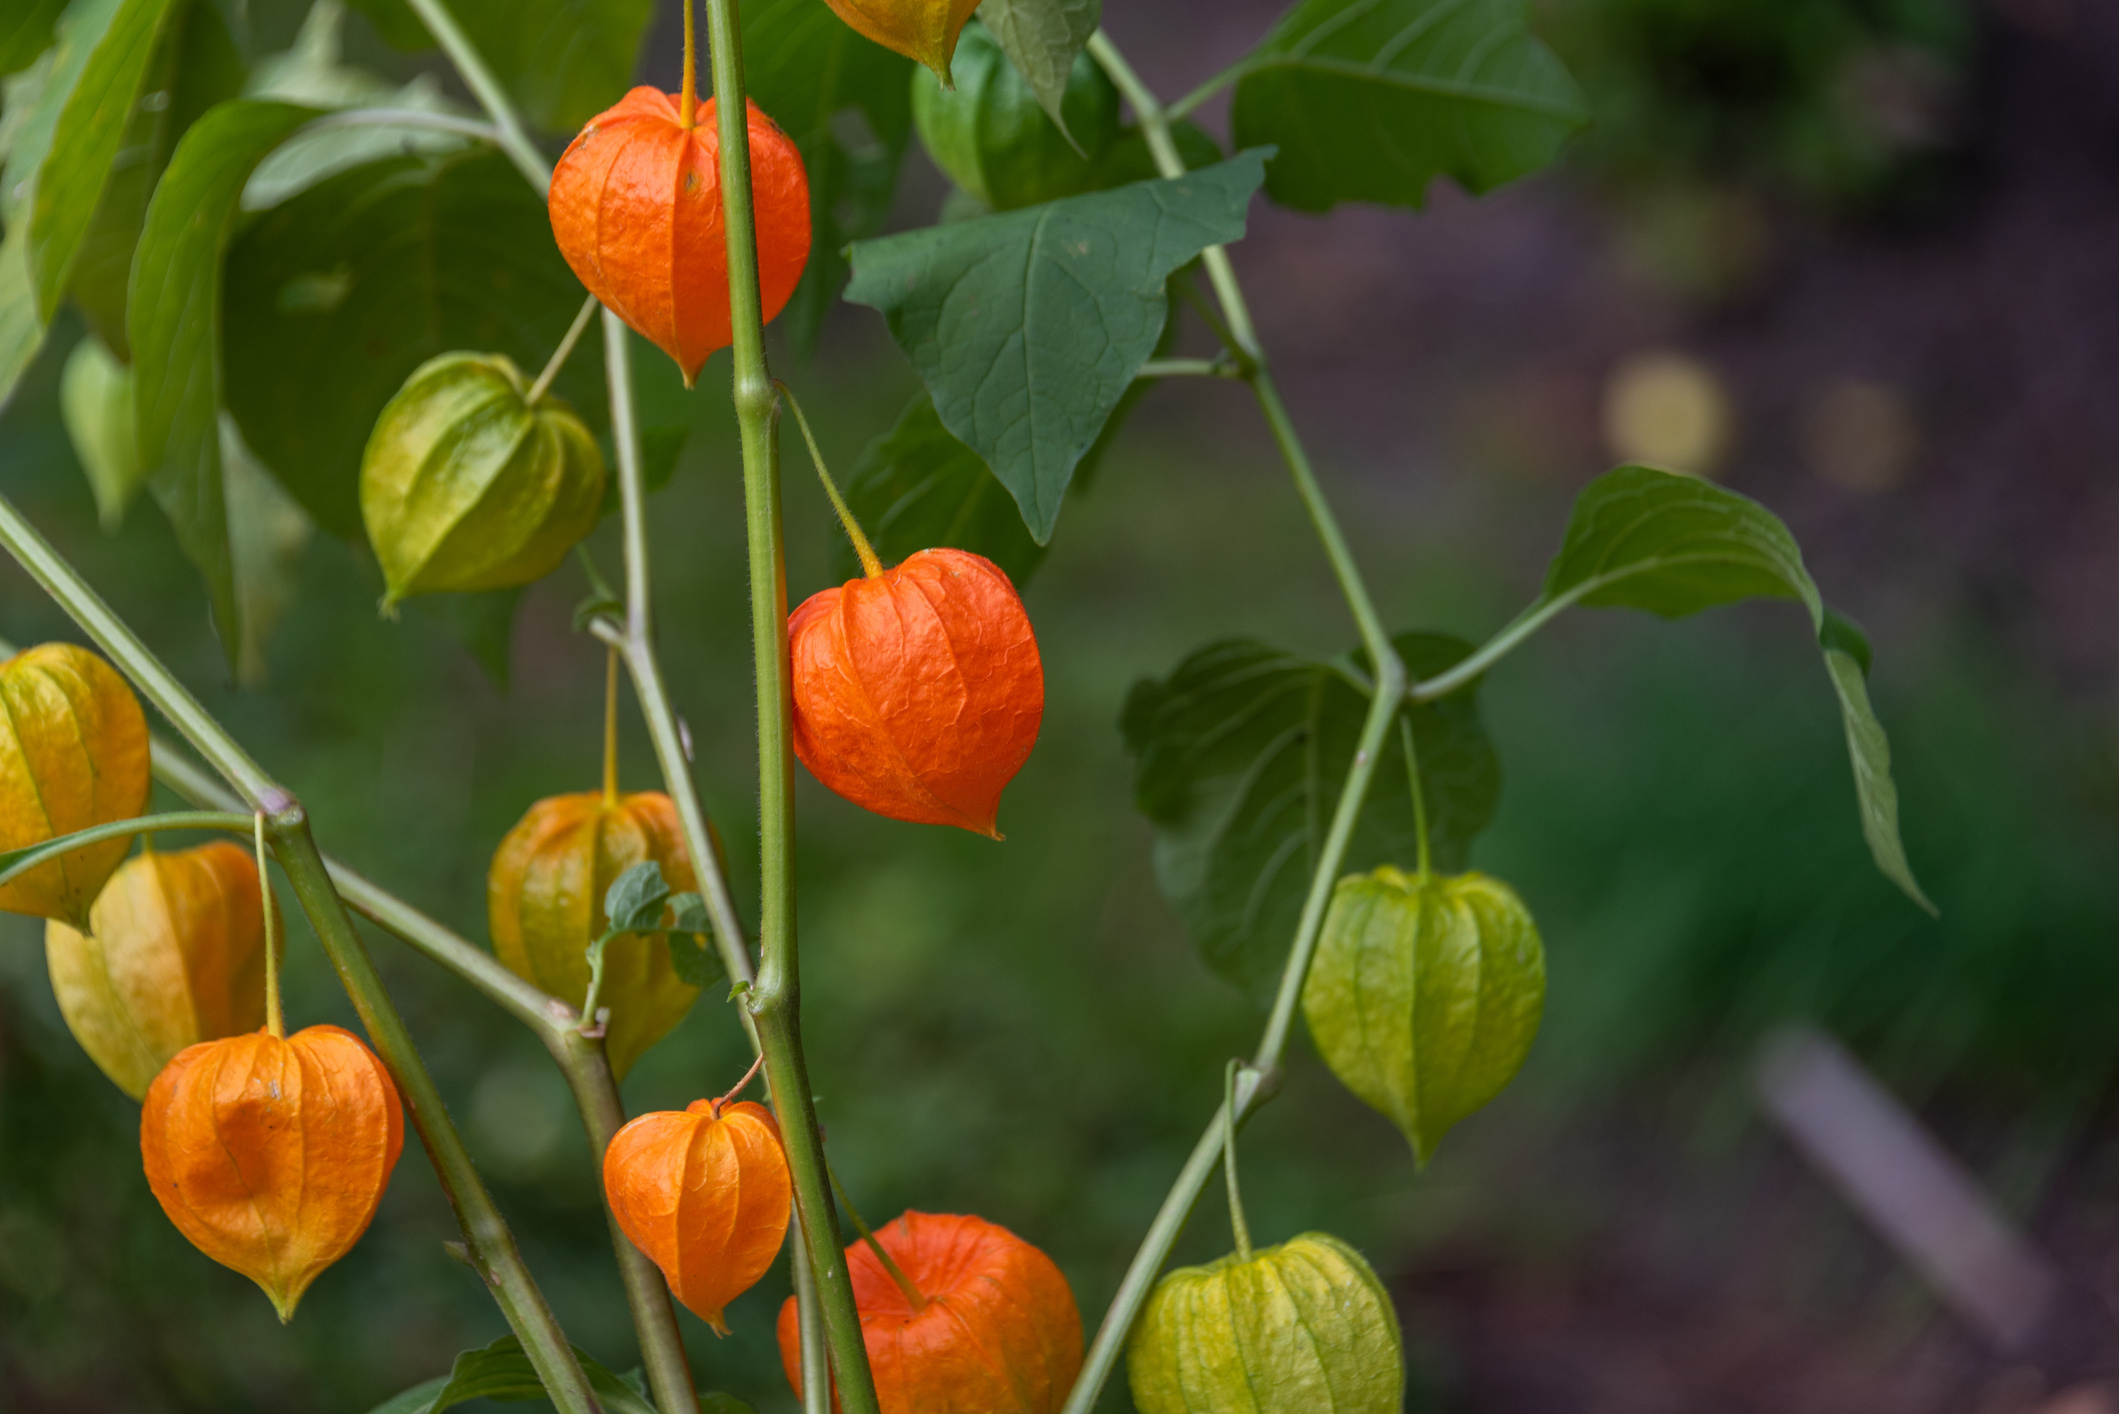 Physalis: Tomatillo, a plant of the nightshade family. 2120x1420 HD Wallpaper.